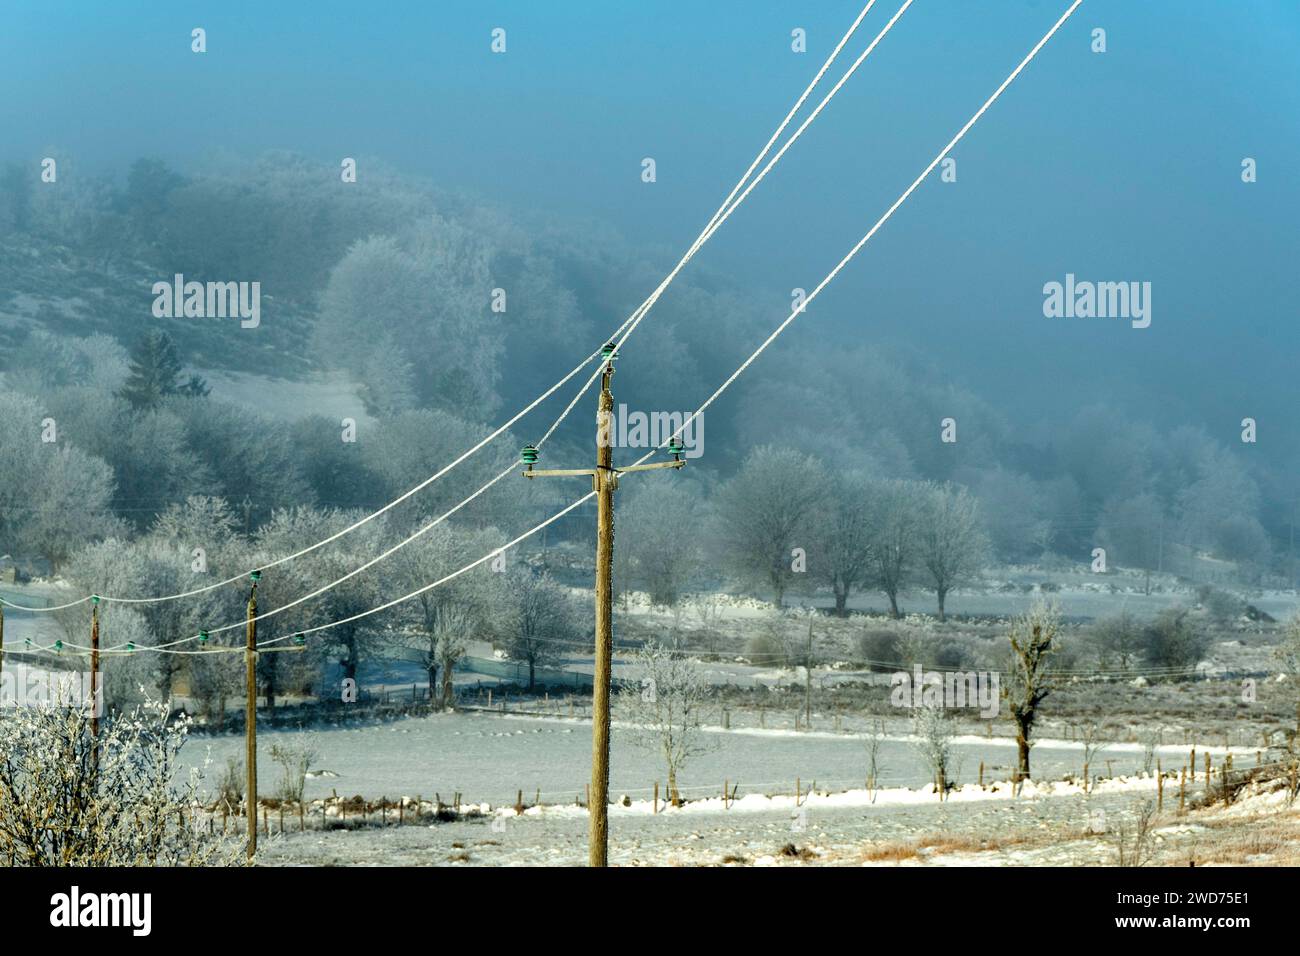 A snowy hillside with power lines and lush trees in the fog Stock Photo